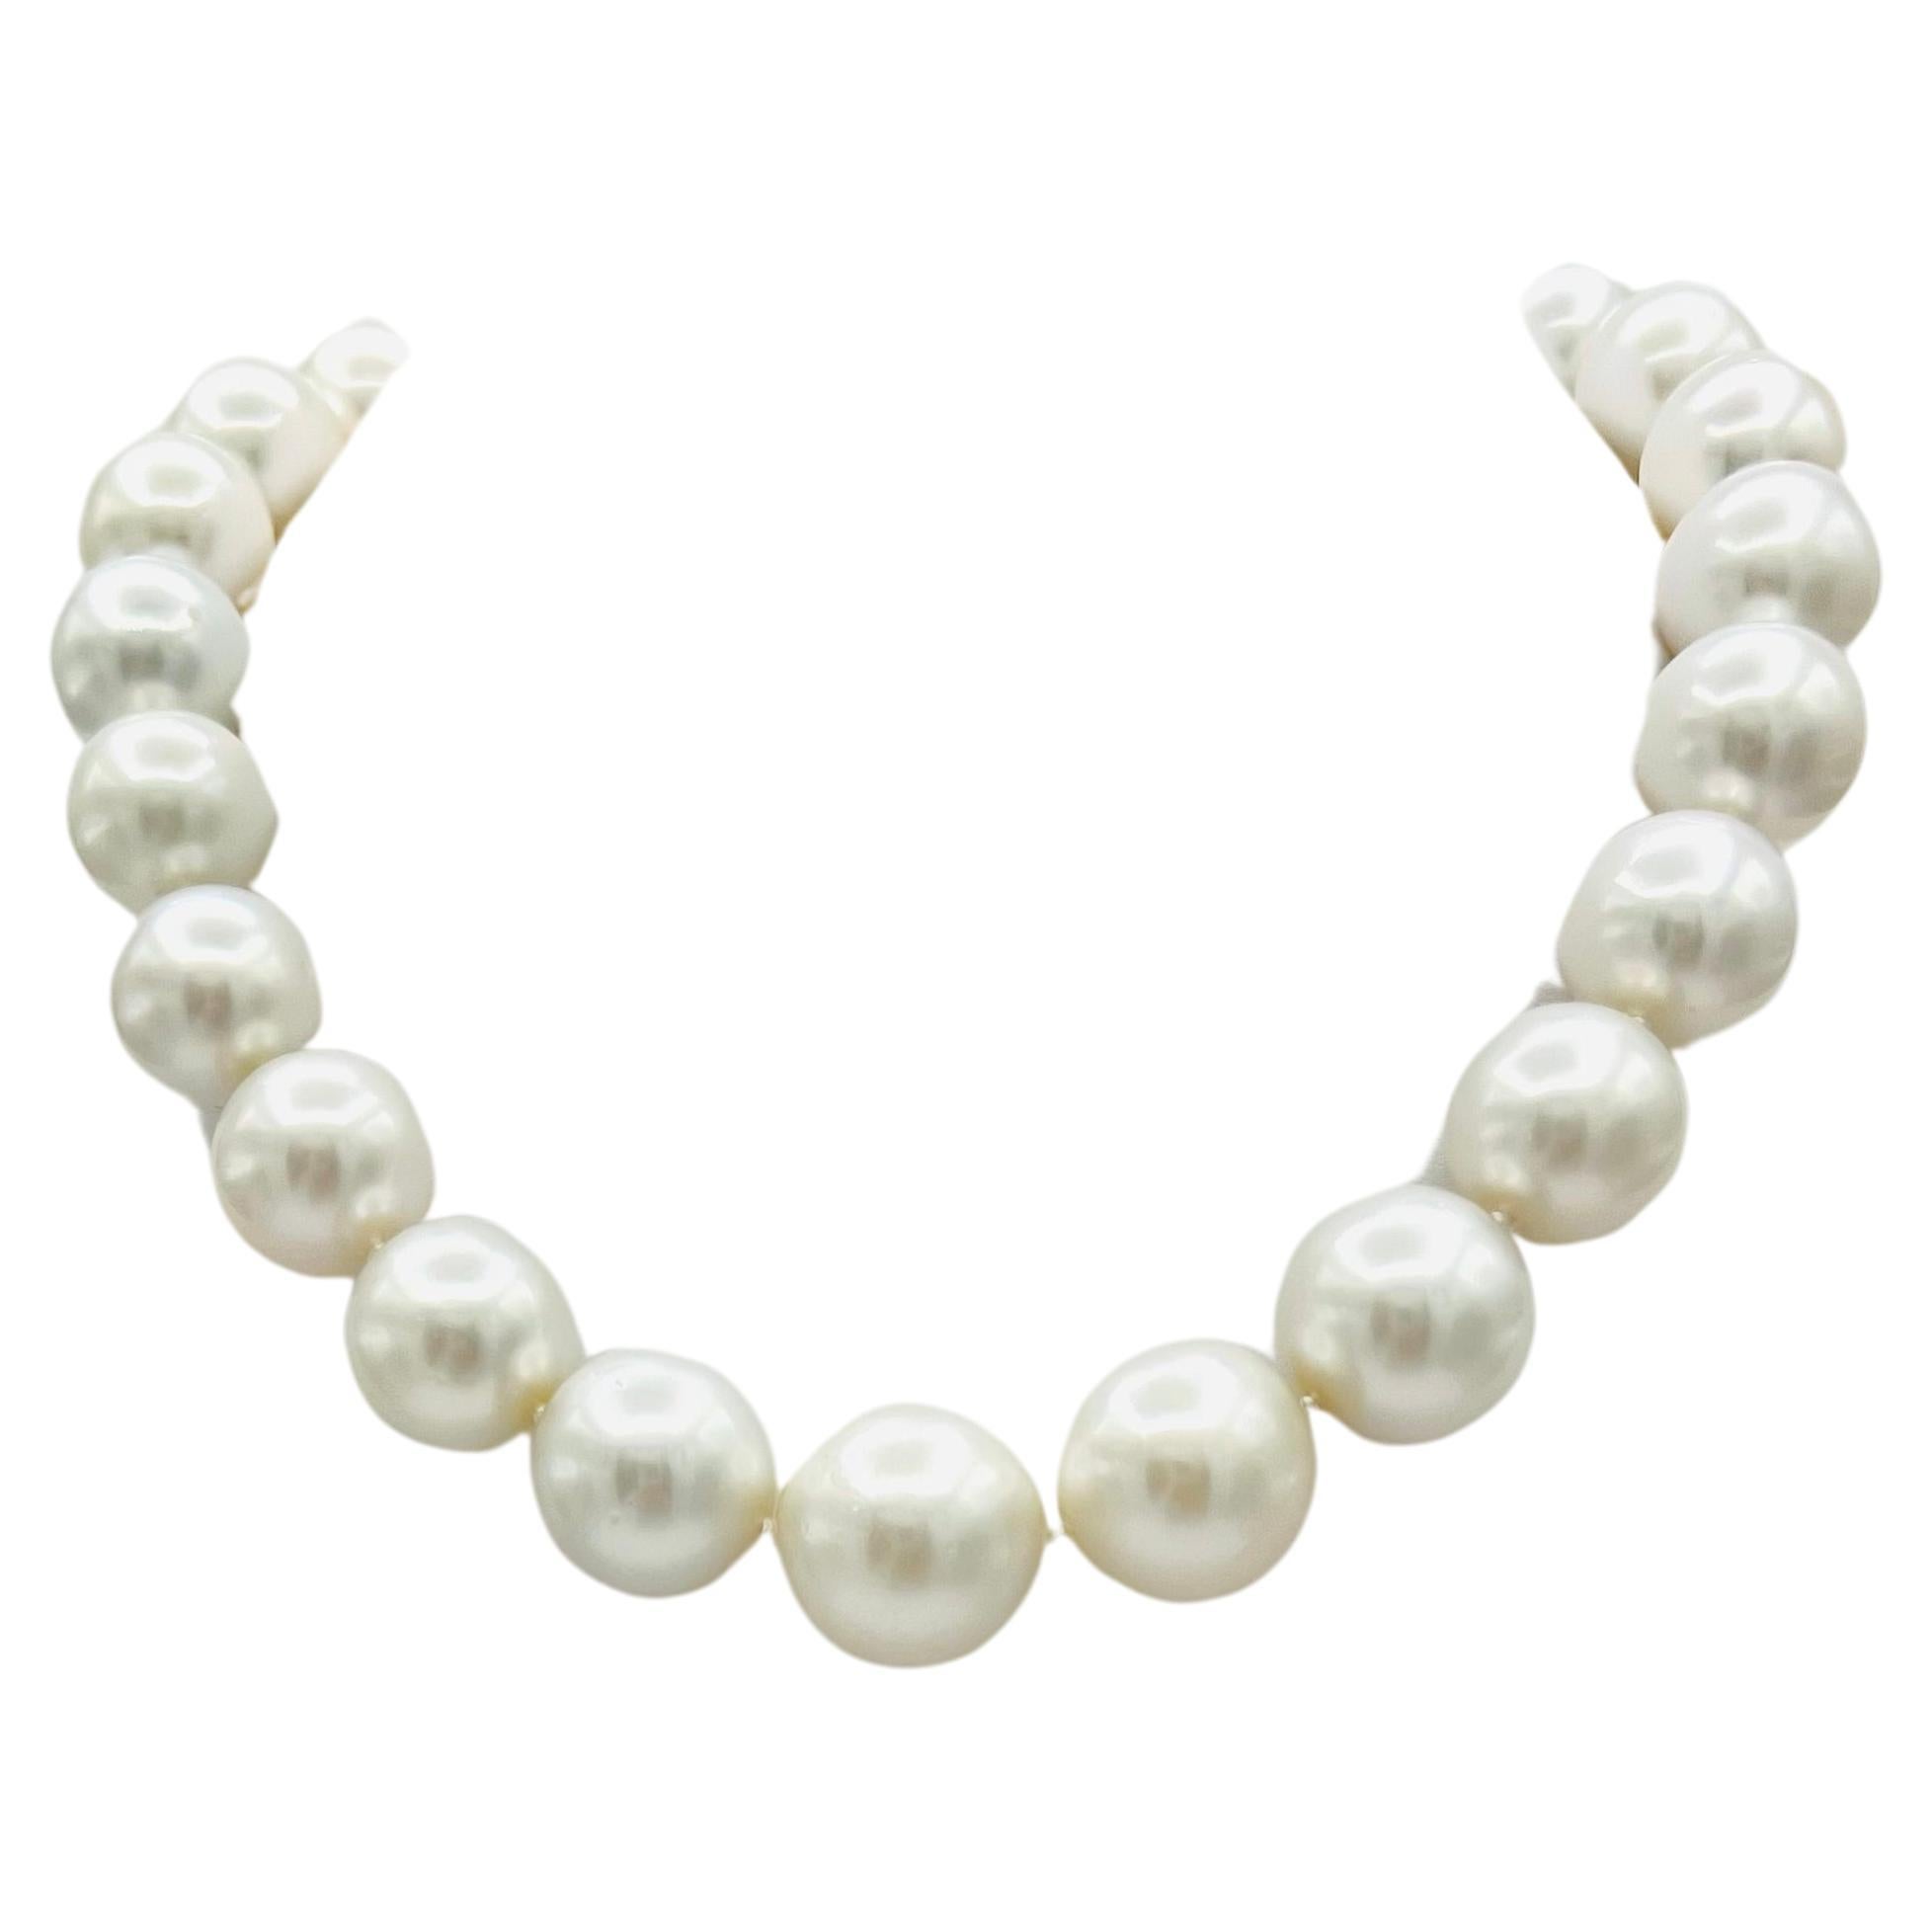 White South Sea Pearl and White Diamond Necklace in 18K White Gold